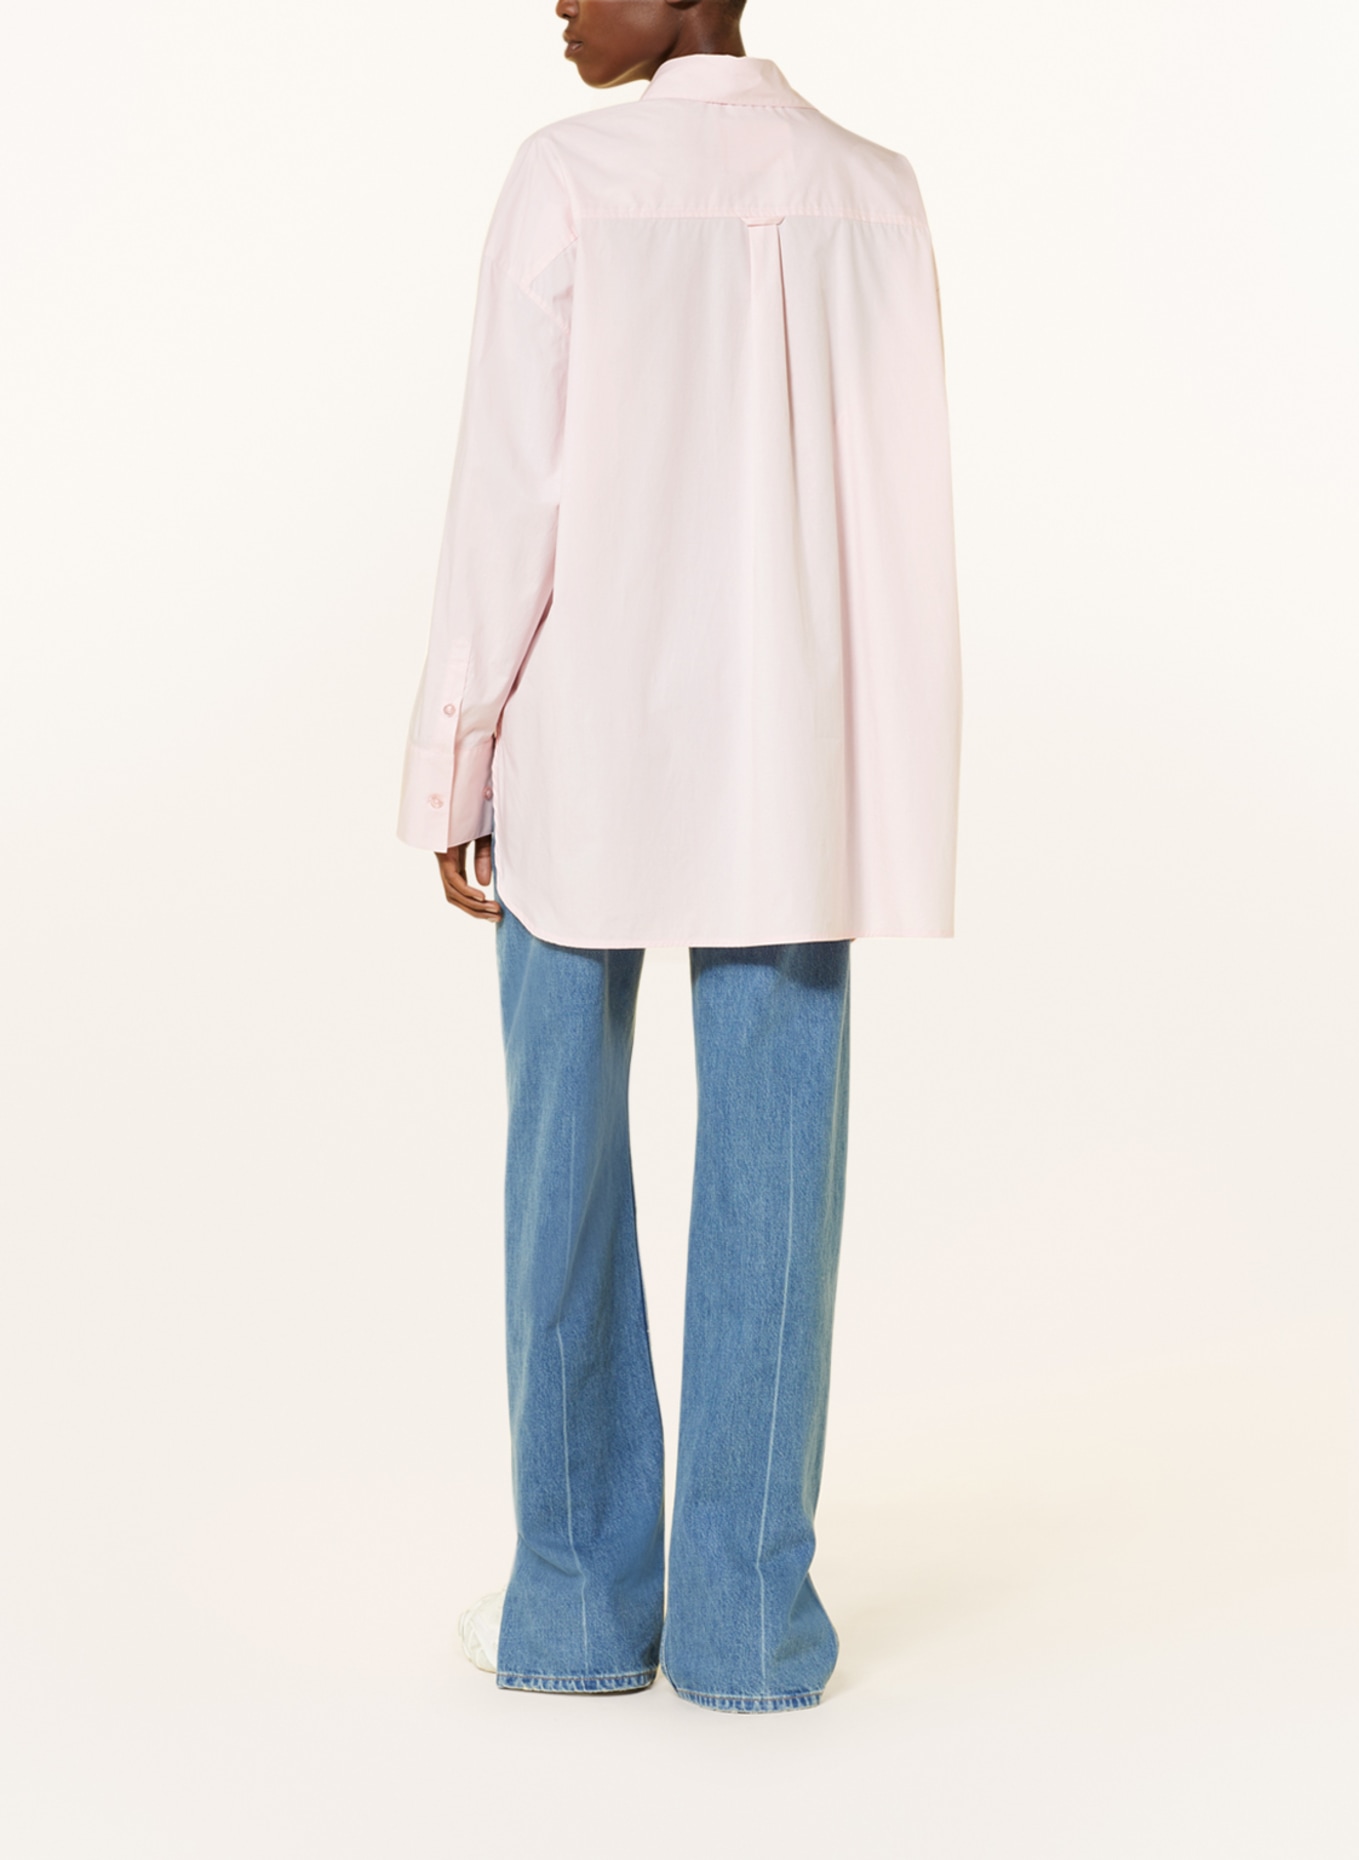 REMAIN Oversized shirt blouse, Color: LIGHT PINK (Image 3)